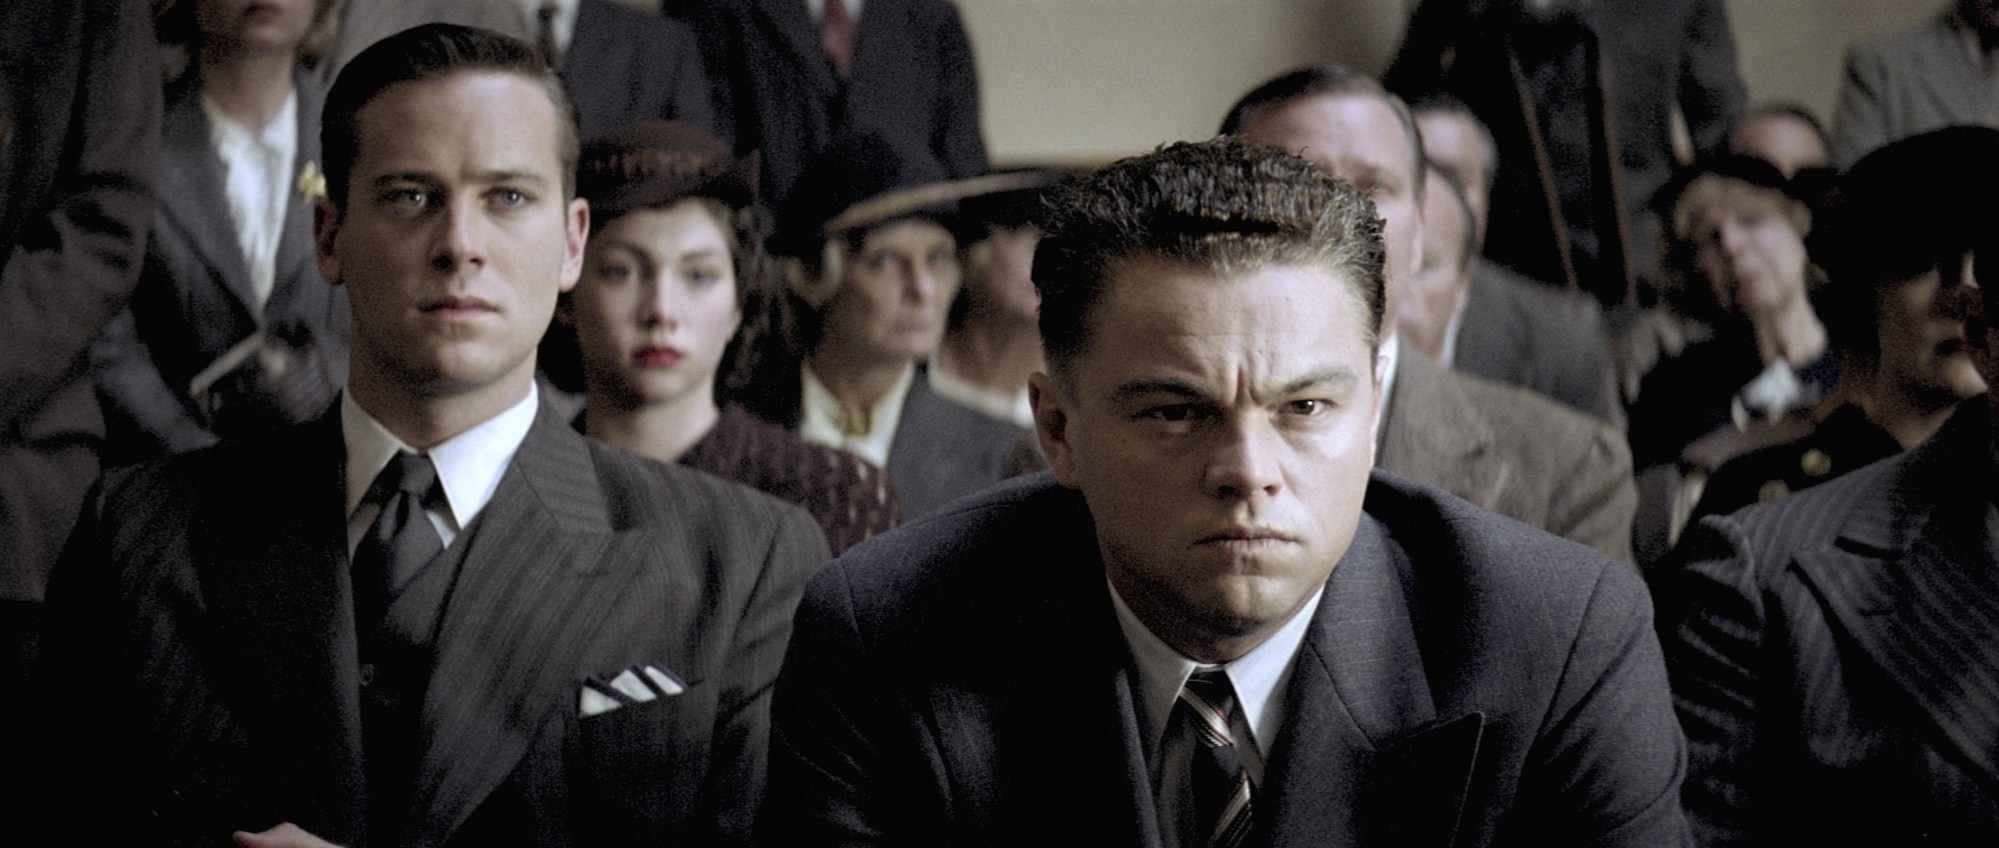 Armie Hammer stars as Clyde Tolson and Leonardo DiCaprio stars as J. Edgar Hoover in Warner Bros. Pictures' J. Edgar (2011)